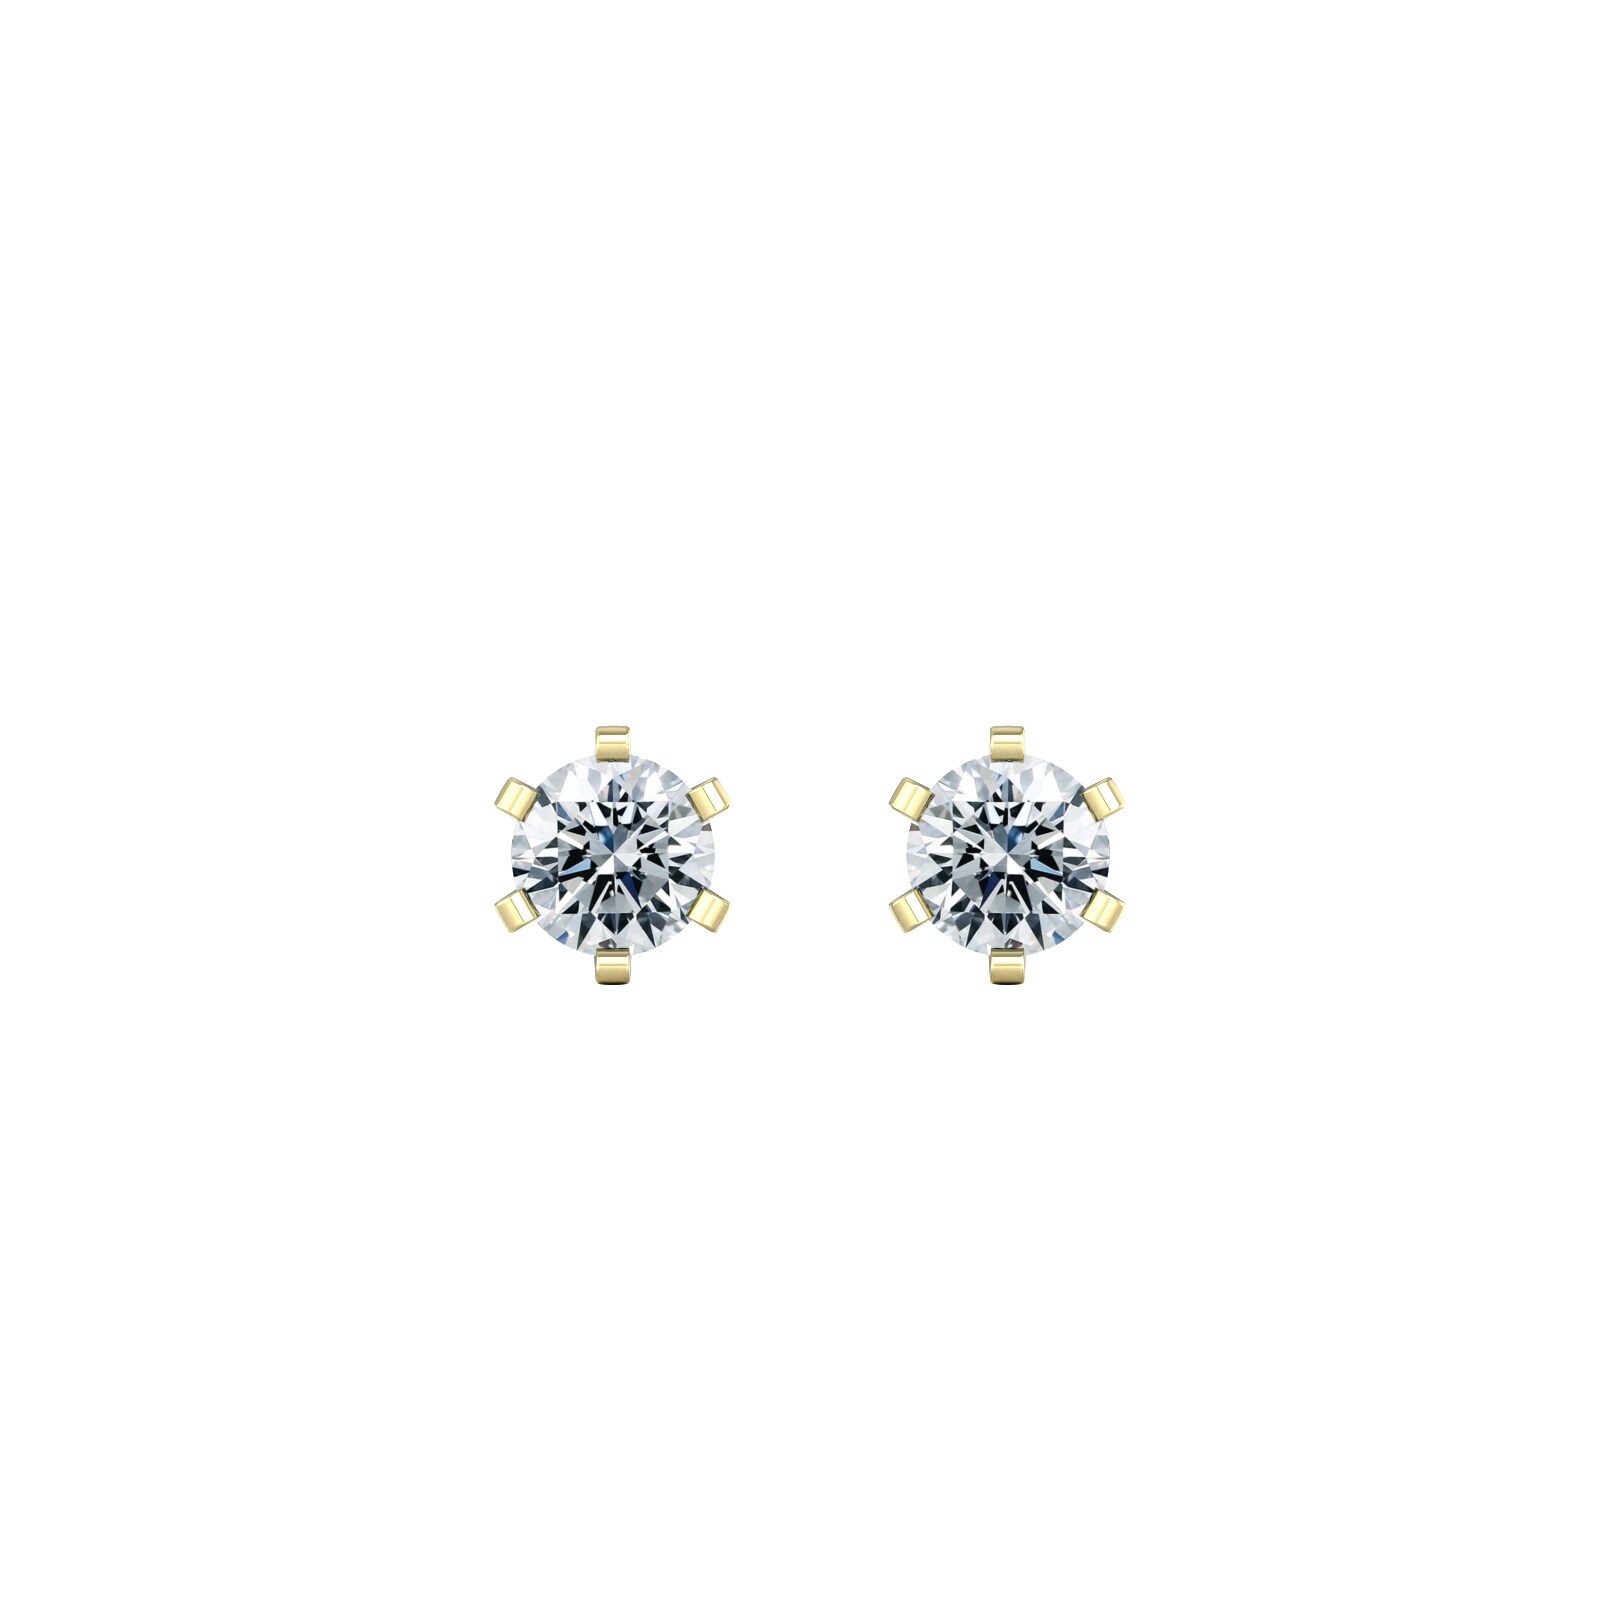 18ct Yellow Gold 0.33cttw Solitaire Diamond Stud Earrings